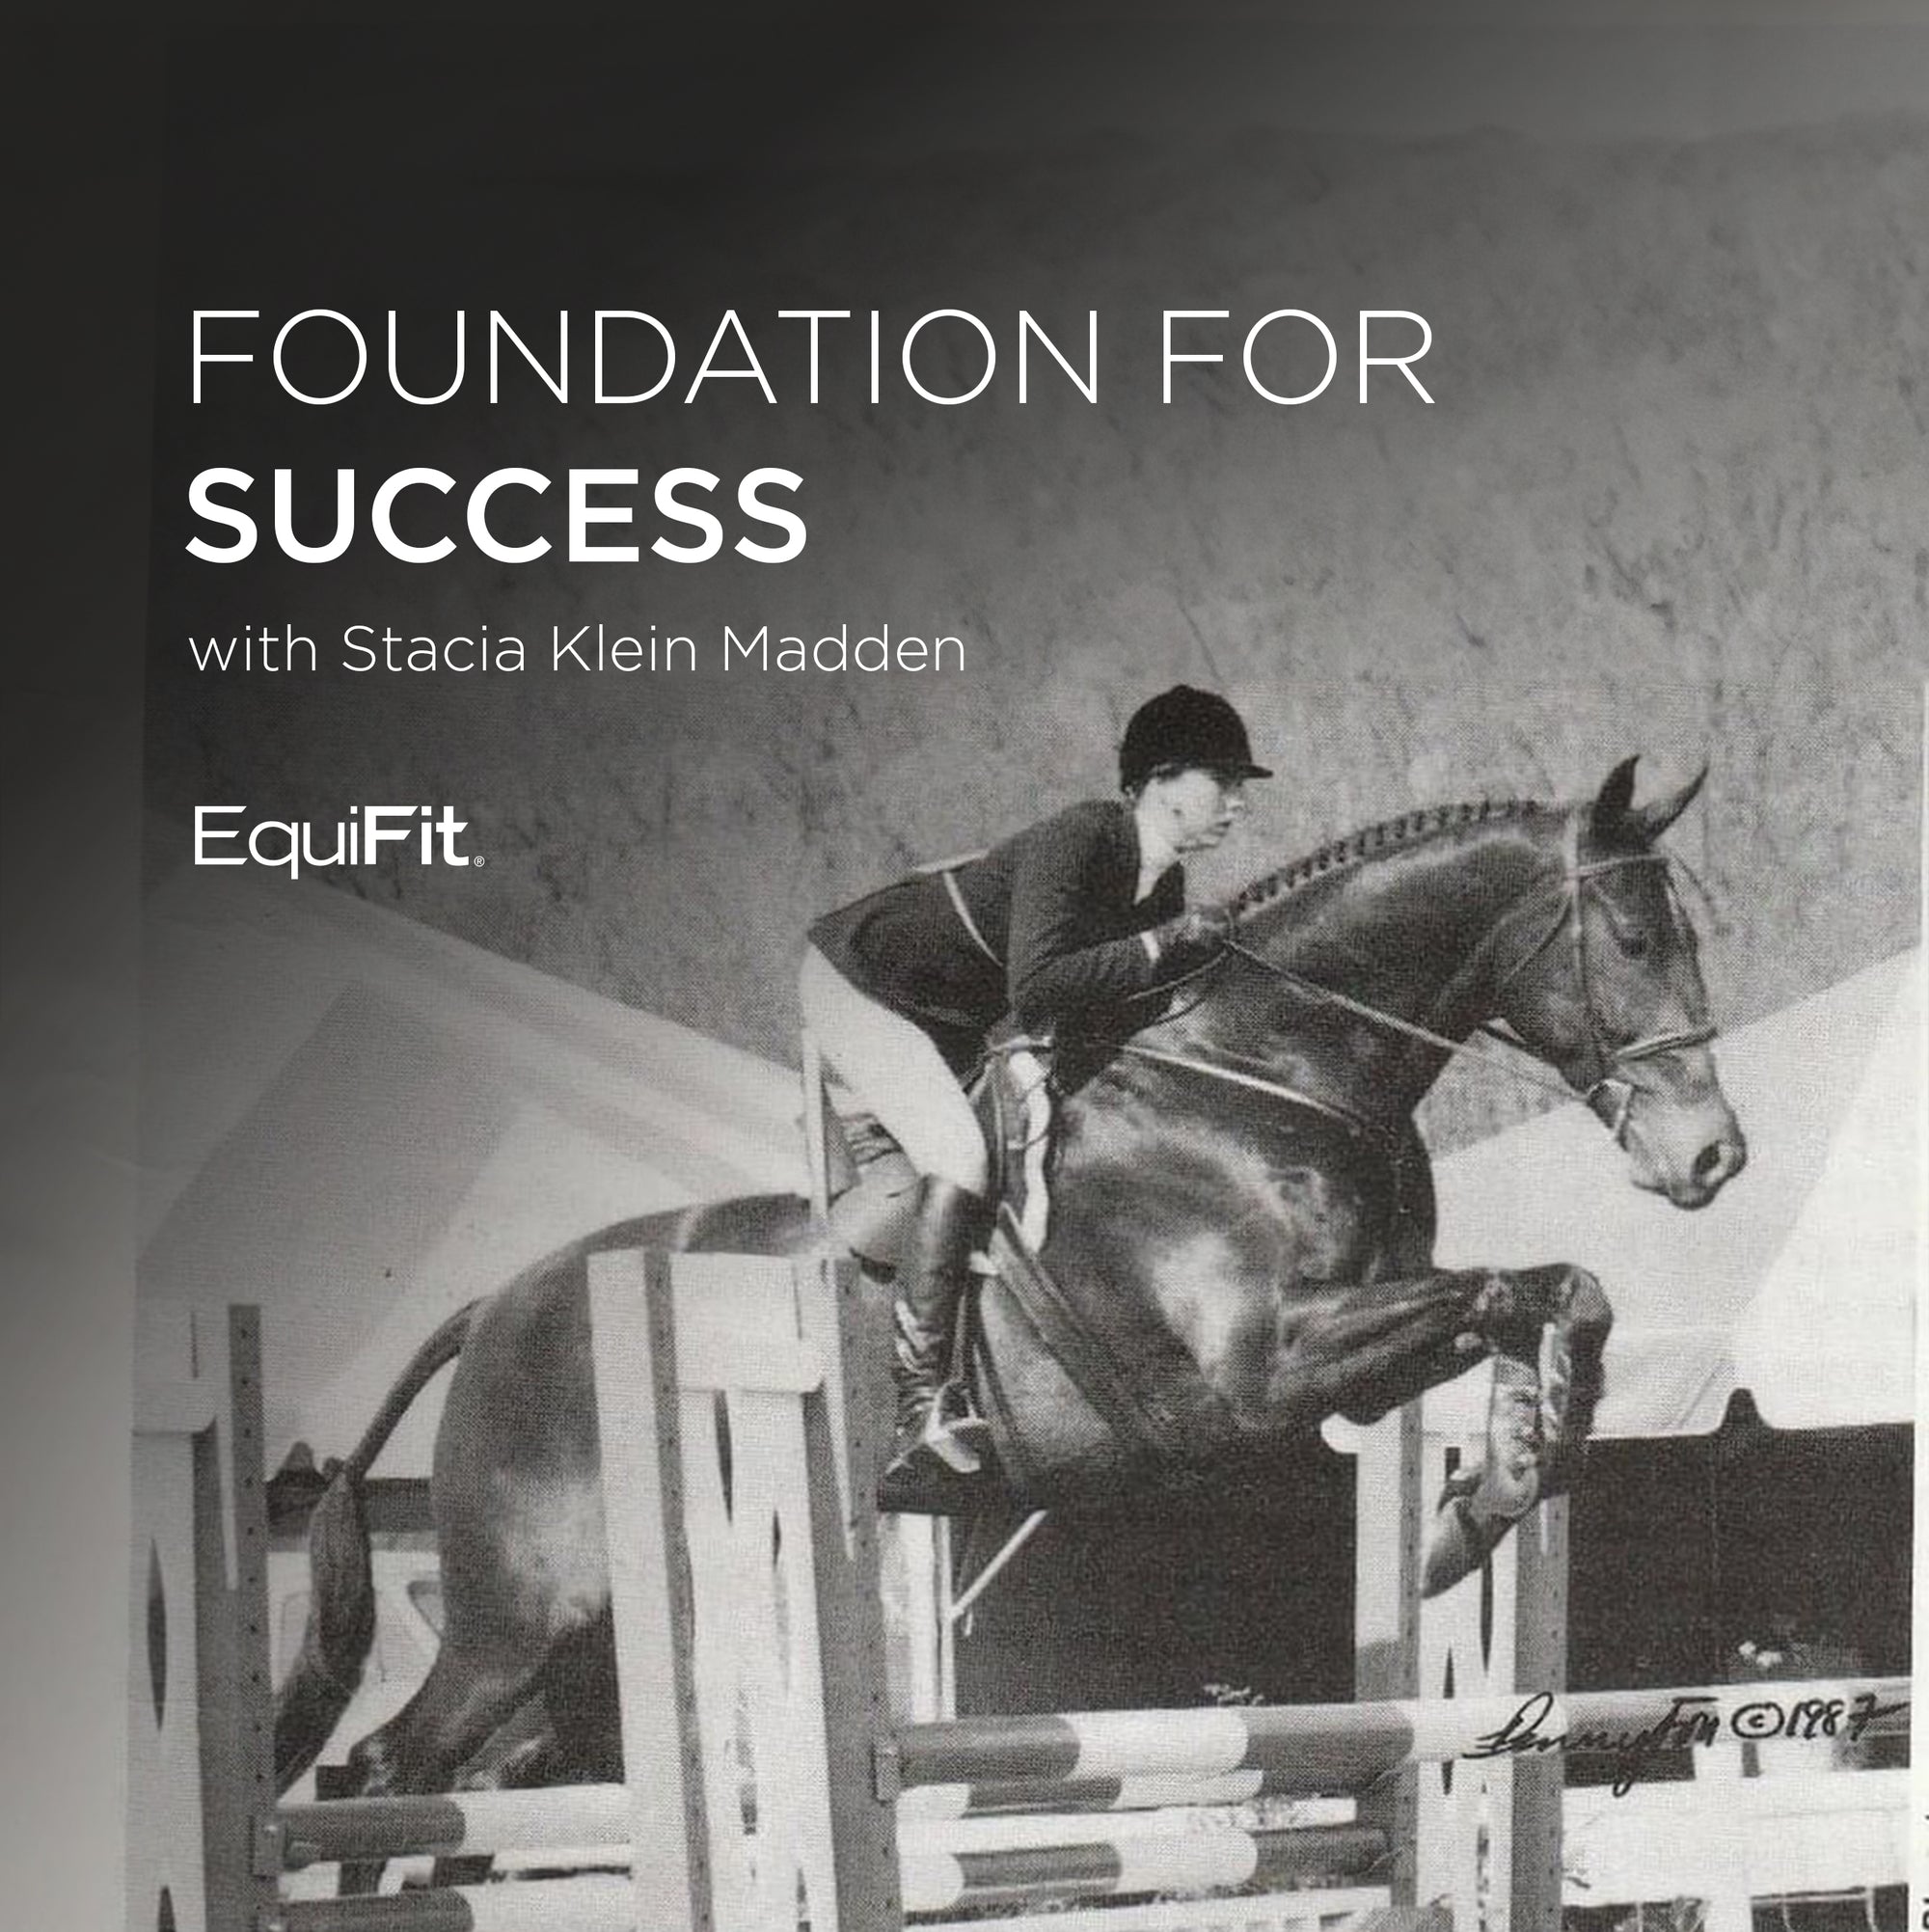 Foundation for Success with Stacia Klein Madden